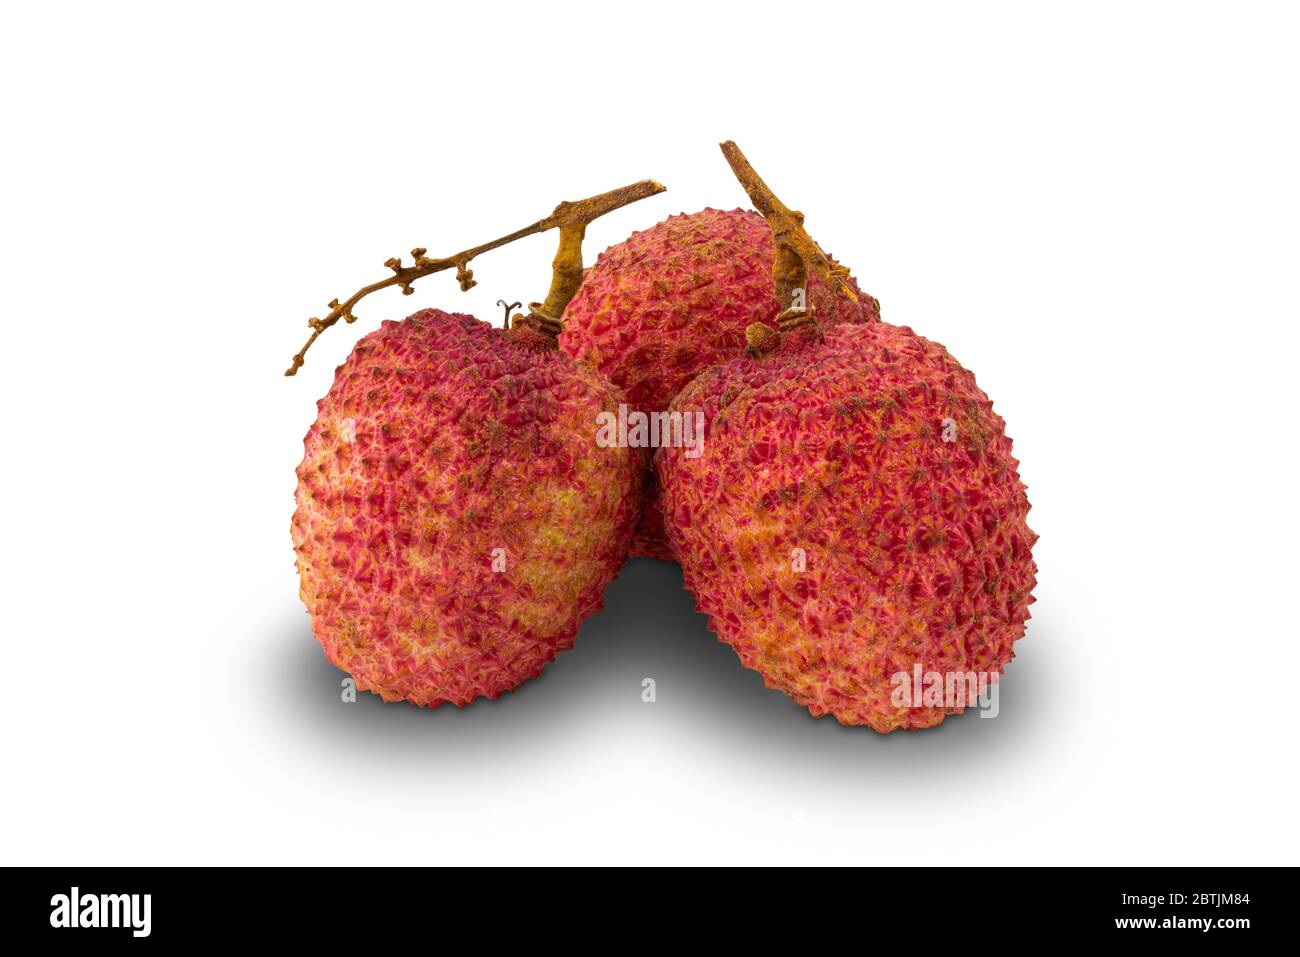 Freshly harvested lychees isolated on white background with clipping path. Stock Photo